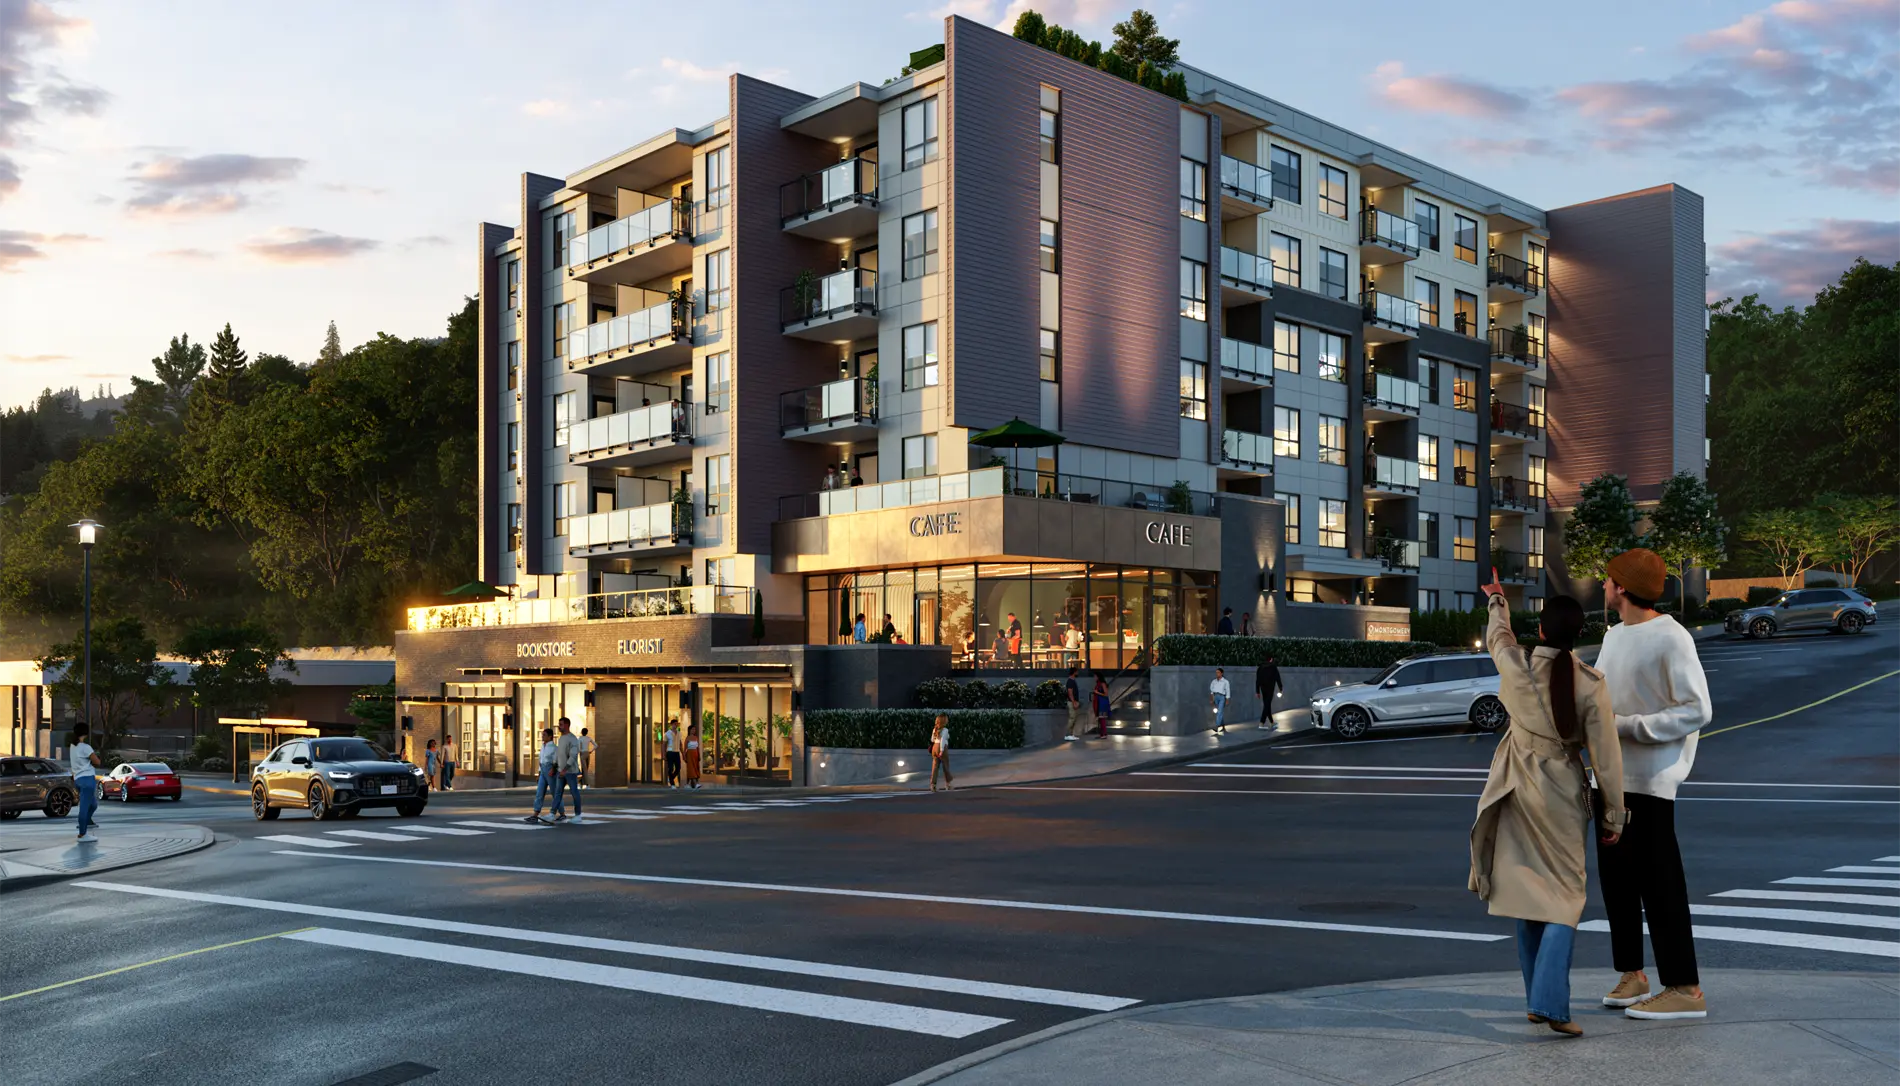 Montgomery by Redekop Faye is a mixed-use Mission mid-rise with 85 condominiums.